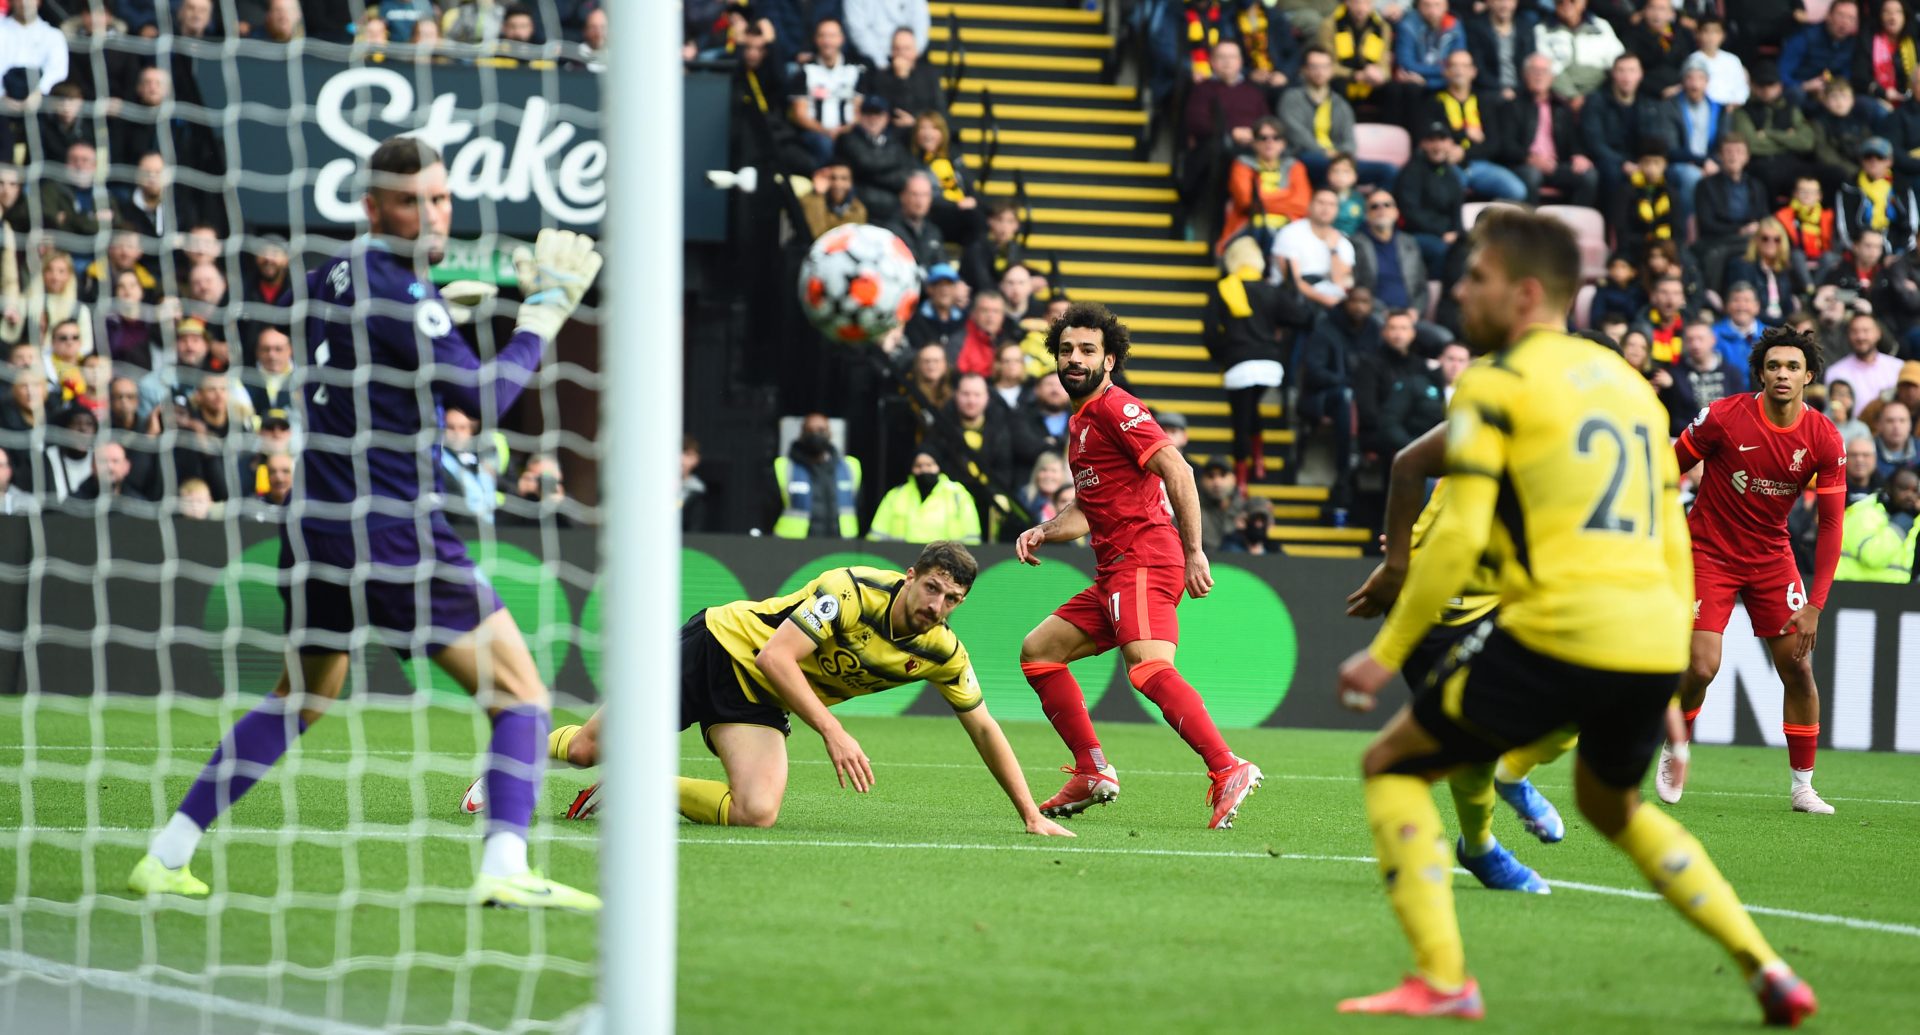 Mohamed Salah of Liverpool caps a twisting run with a magical goal against Watford. Photo: Andrew Powell/ Liverpool FC via Getty Images